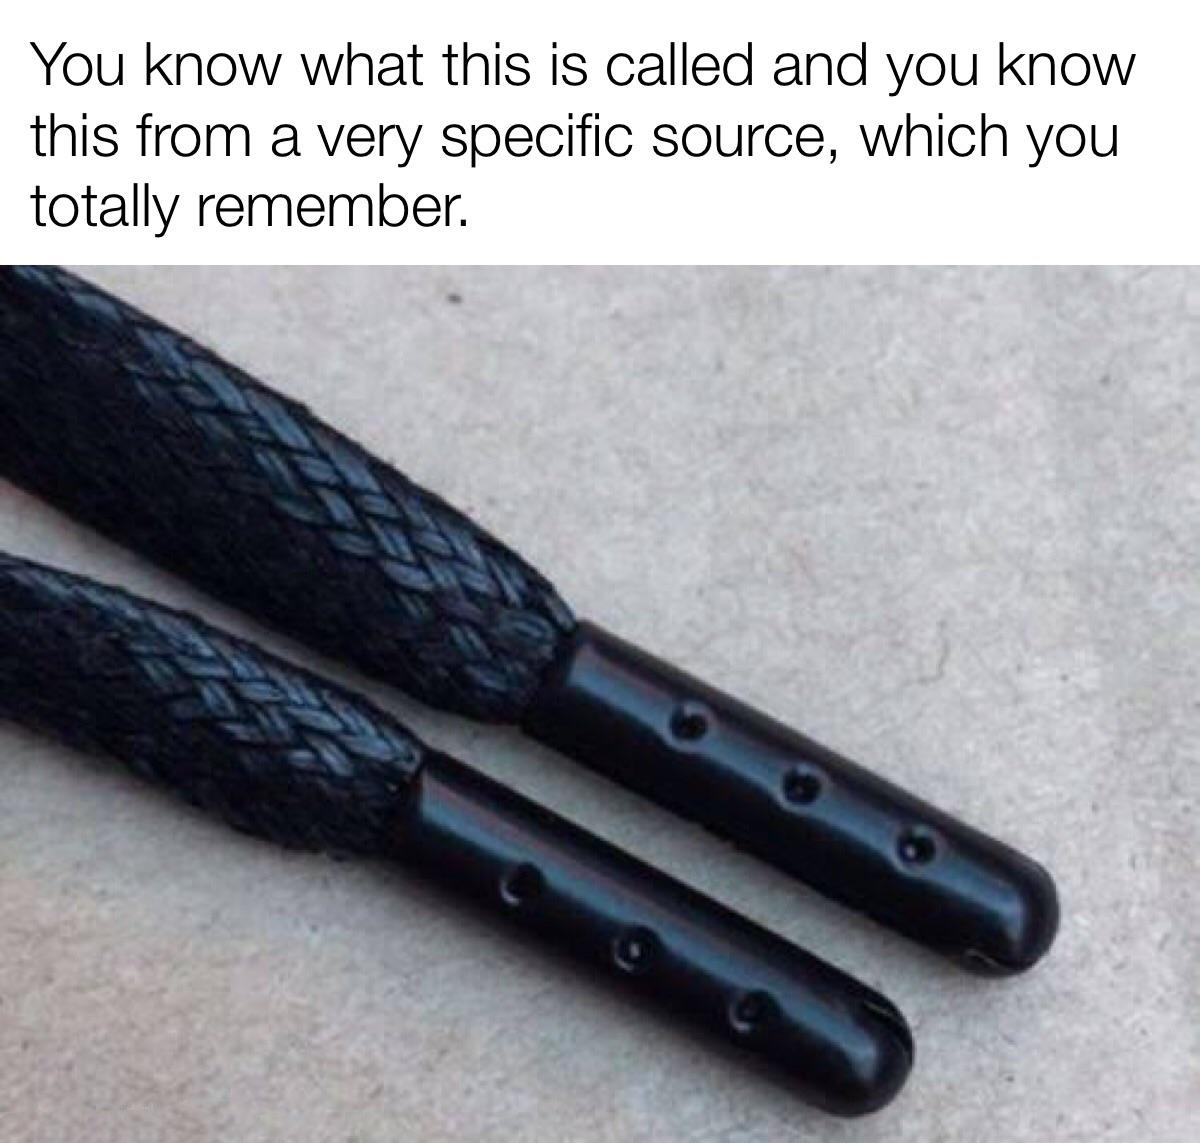 dank memes - aglet shoe - You know what this is called and you know this from a very specific source, which you totally remember